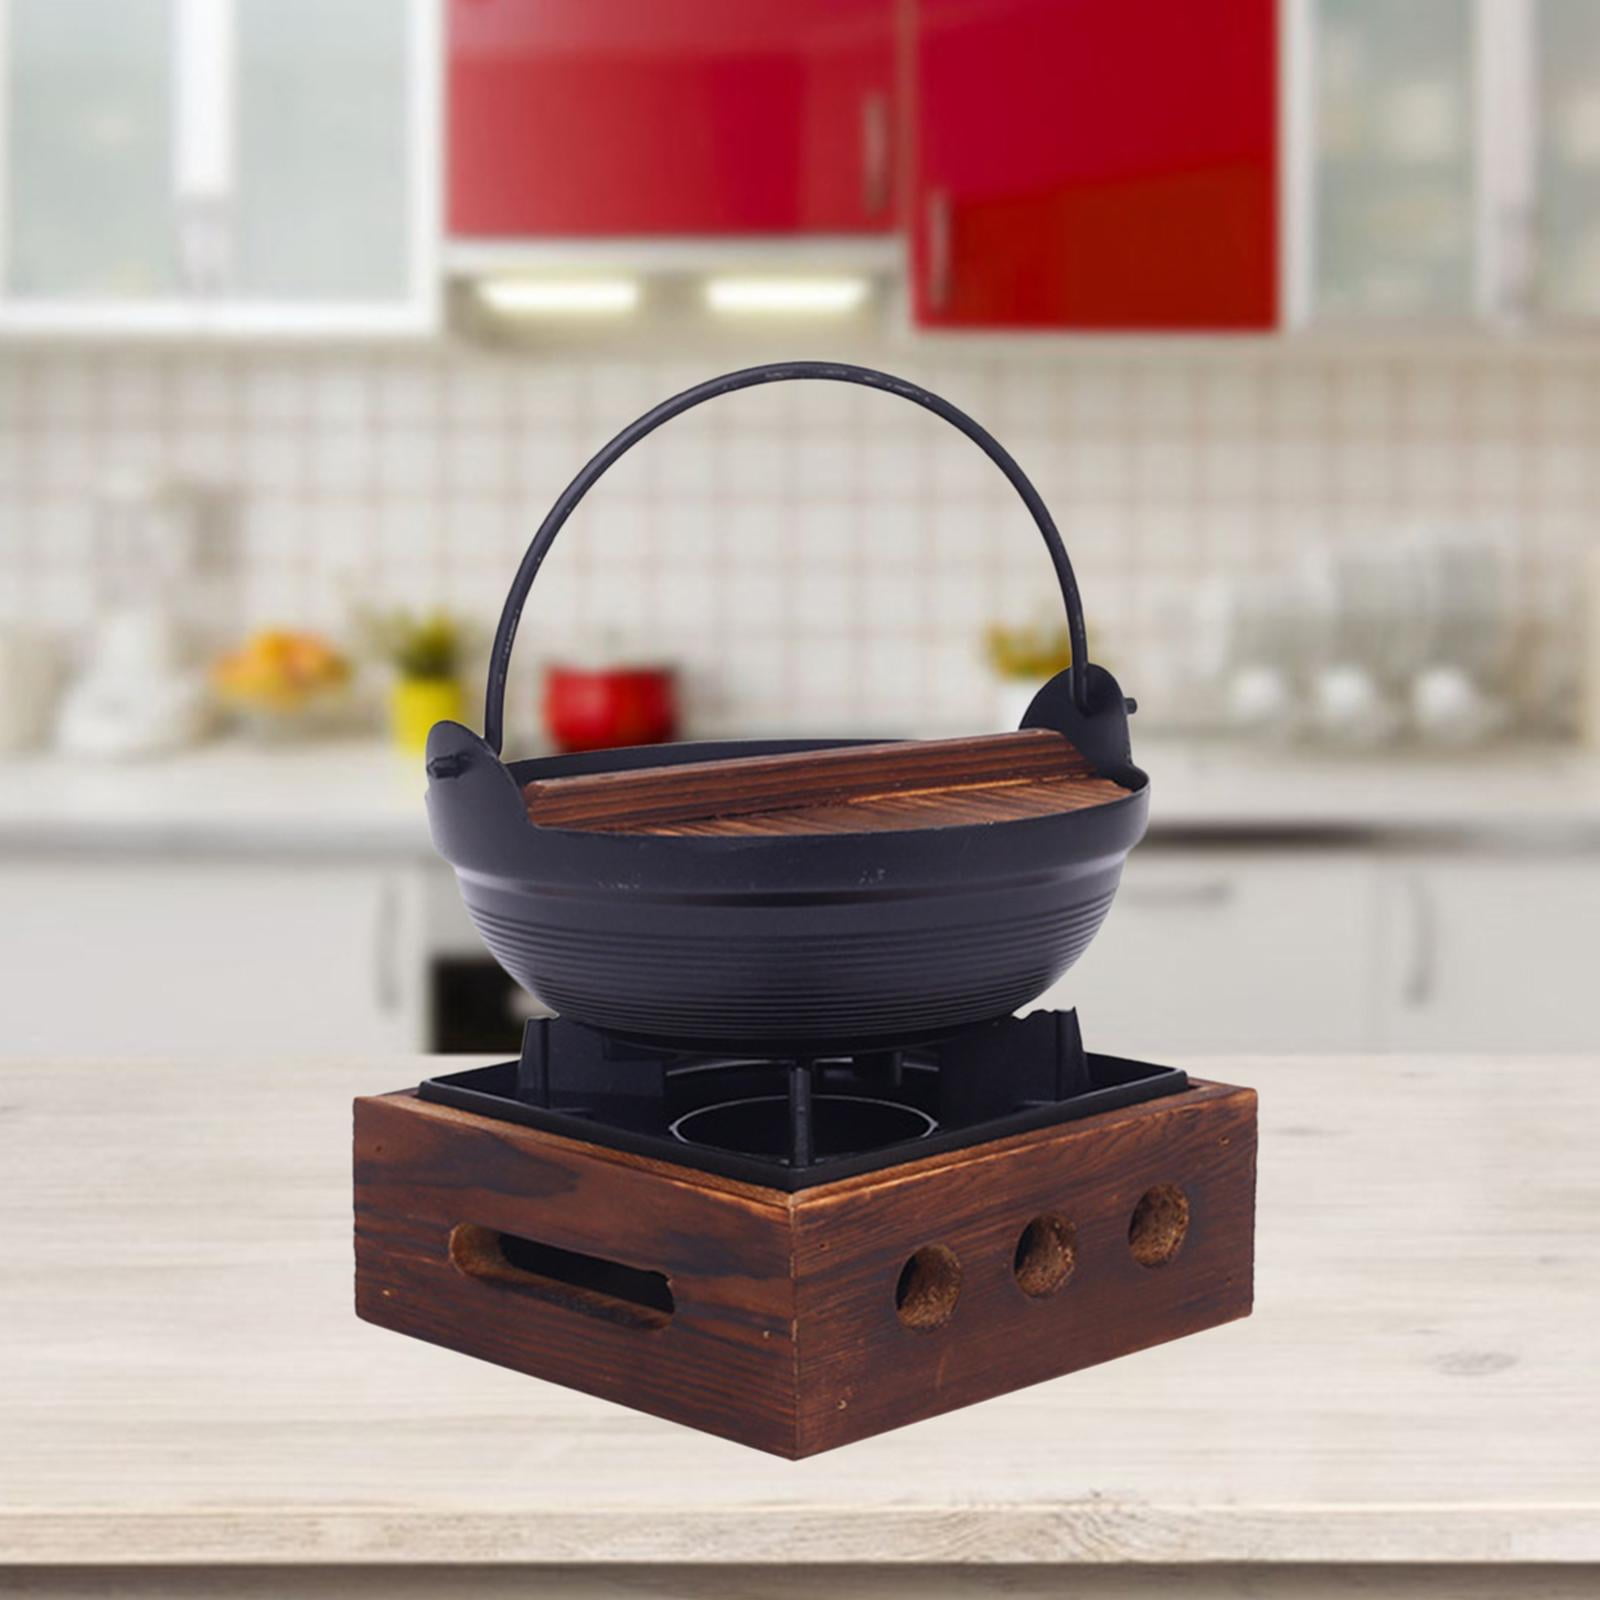 Cast Iron Cooking Pots On Wood Stock Photo 135612338